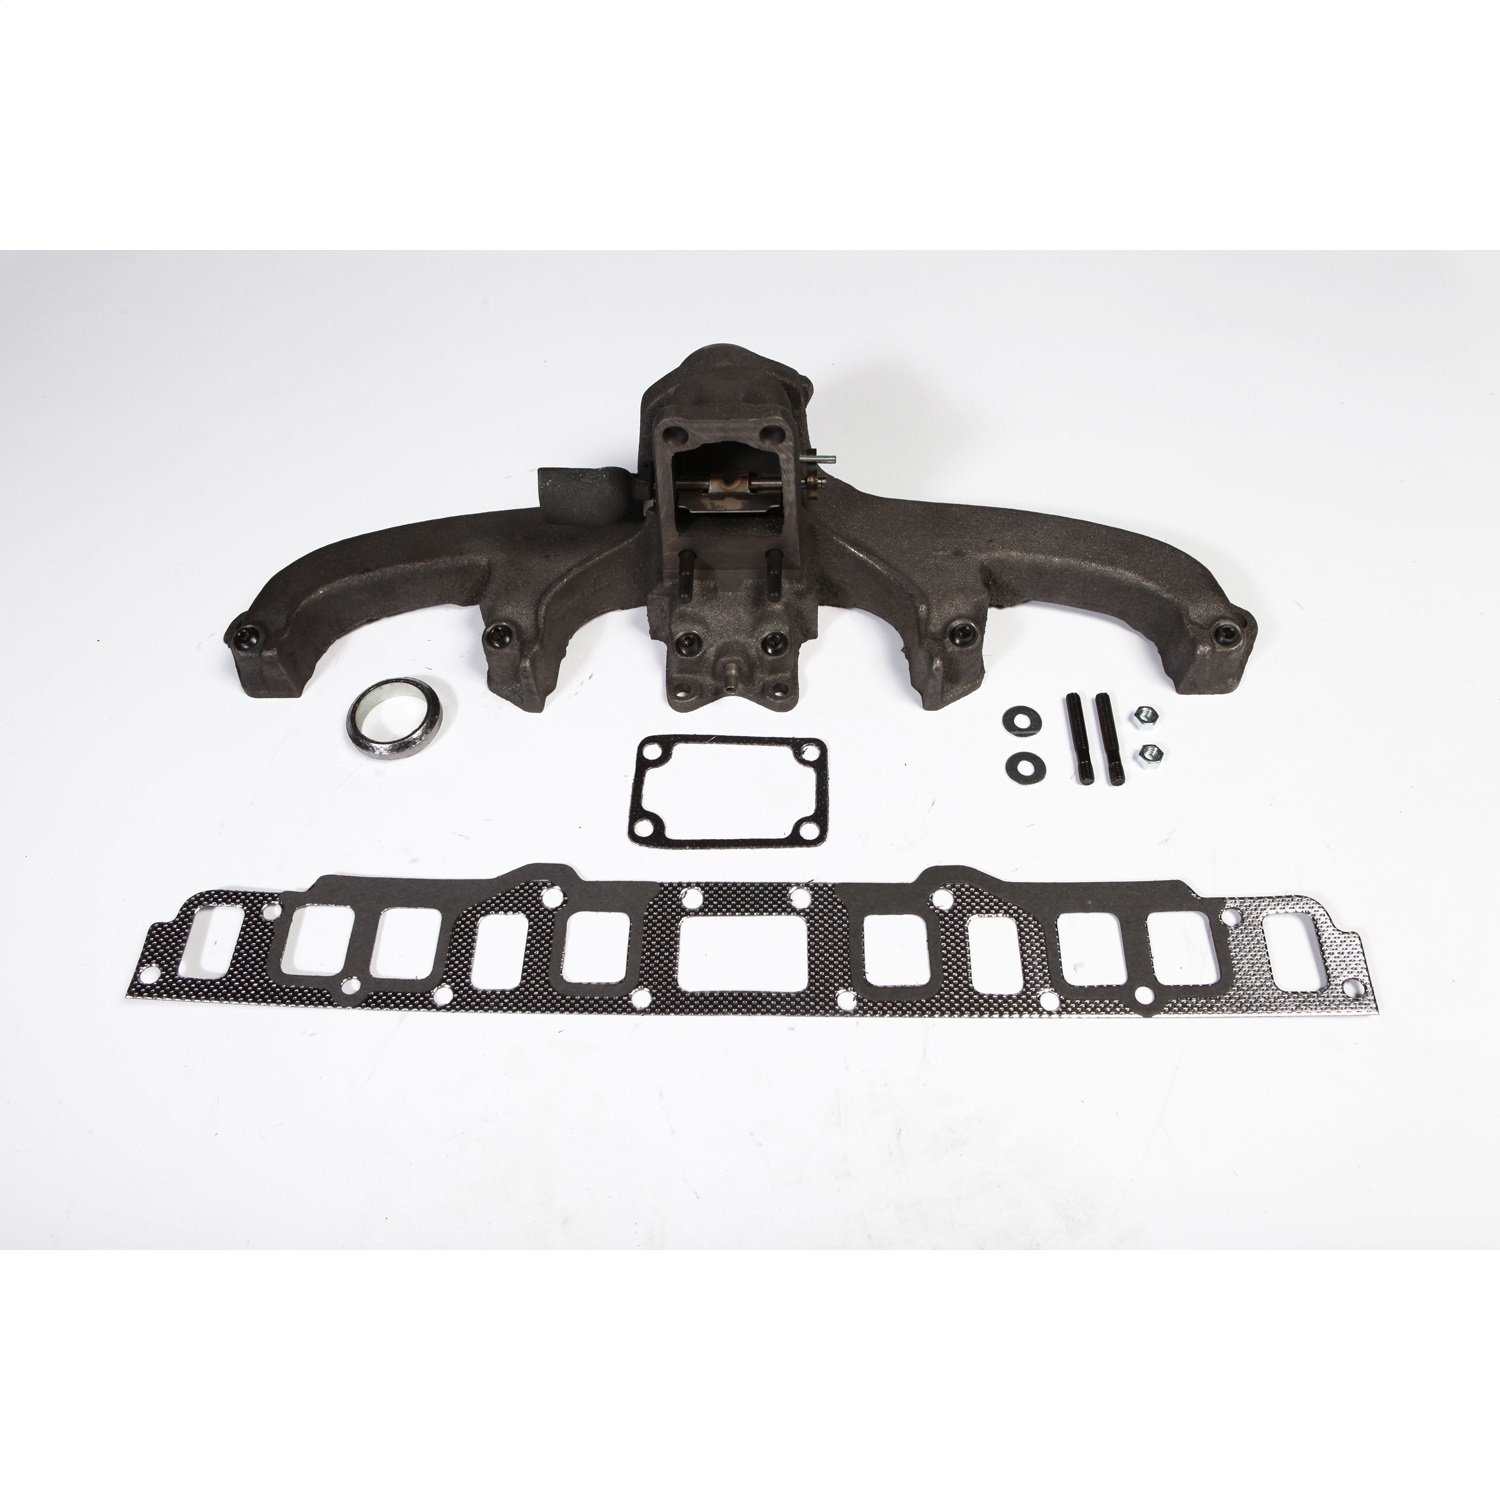 Exhaust Manifold Kit for Select 1972-1980 Jeep Models with a 3.8L or 4.2L 6 Cylinder Engine